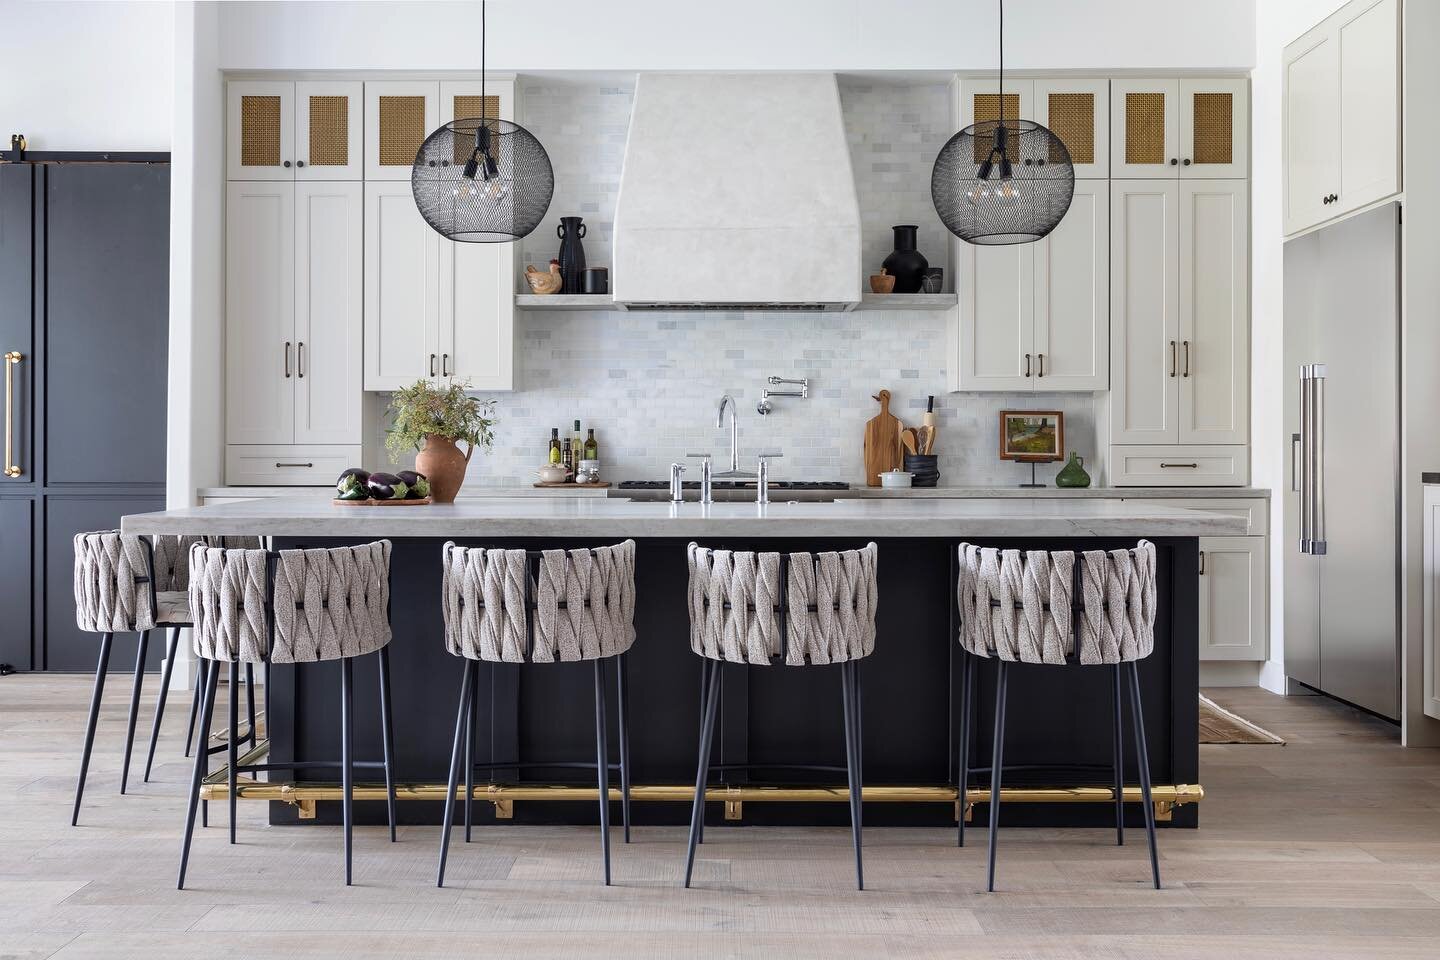 We love helping our clients create beautiful surroundings!  A Beautiful Life Begins at Home 
@stonecoveringsofhouston @kerrykirkphoto 
.
.
.
.
.
.
.
.

#kitchengoals #kitcheninspo
#whitekitchen #classickitchen
#kitchenenvy #kitchengoals #kitcheninspo